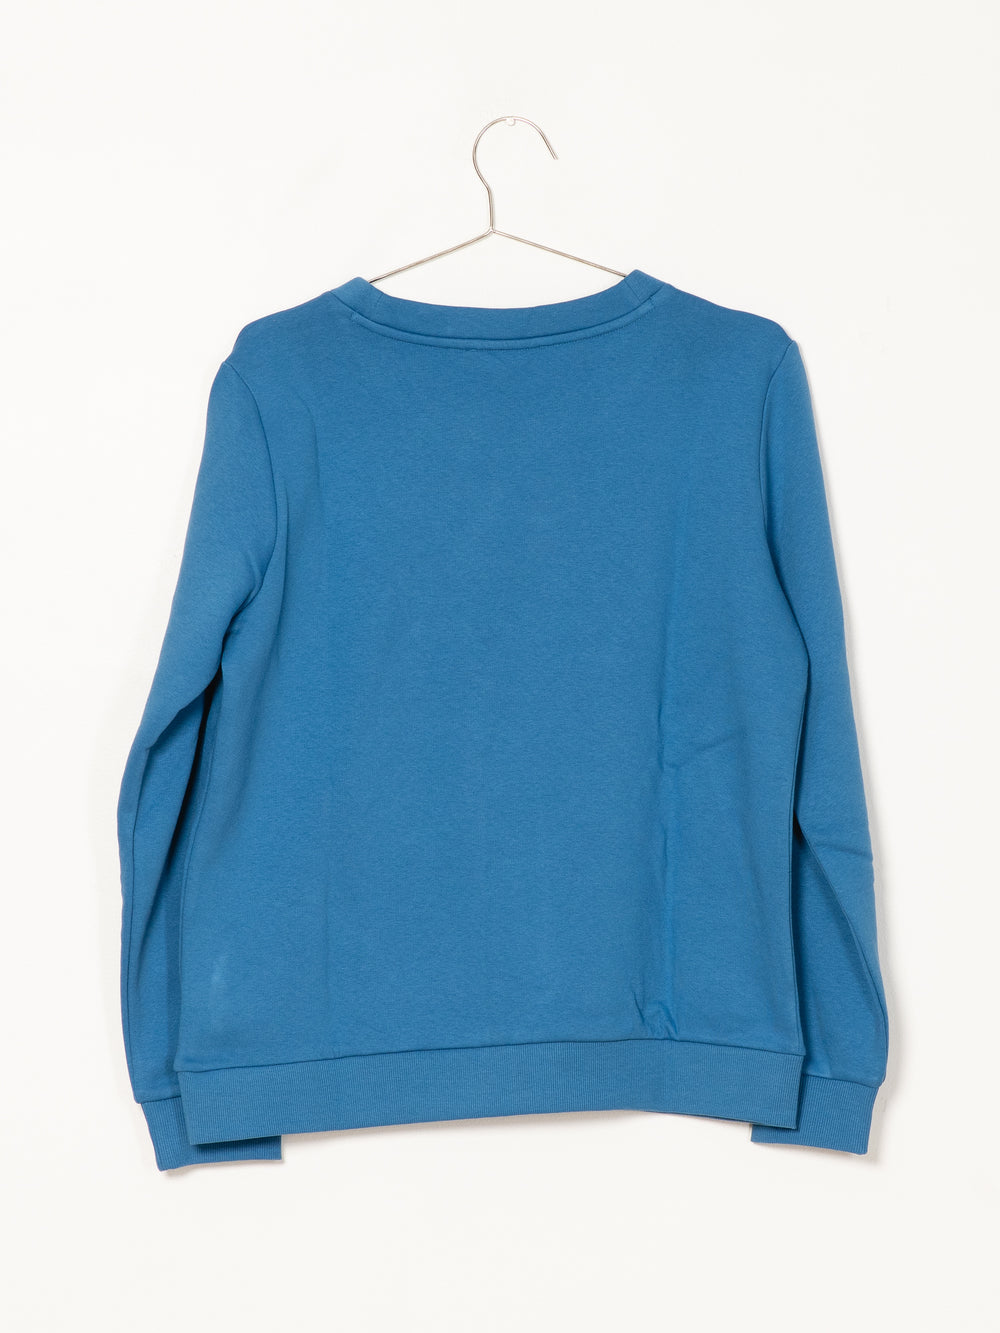 WOMENS VINTAGE CREW - BRIGHT BLUE - CLEARANCE